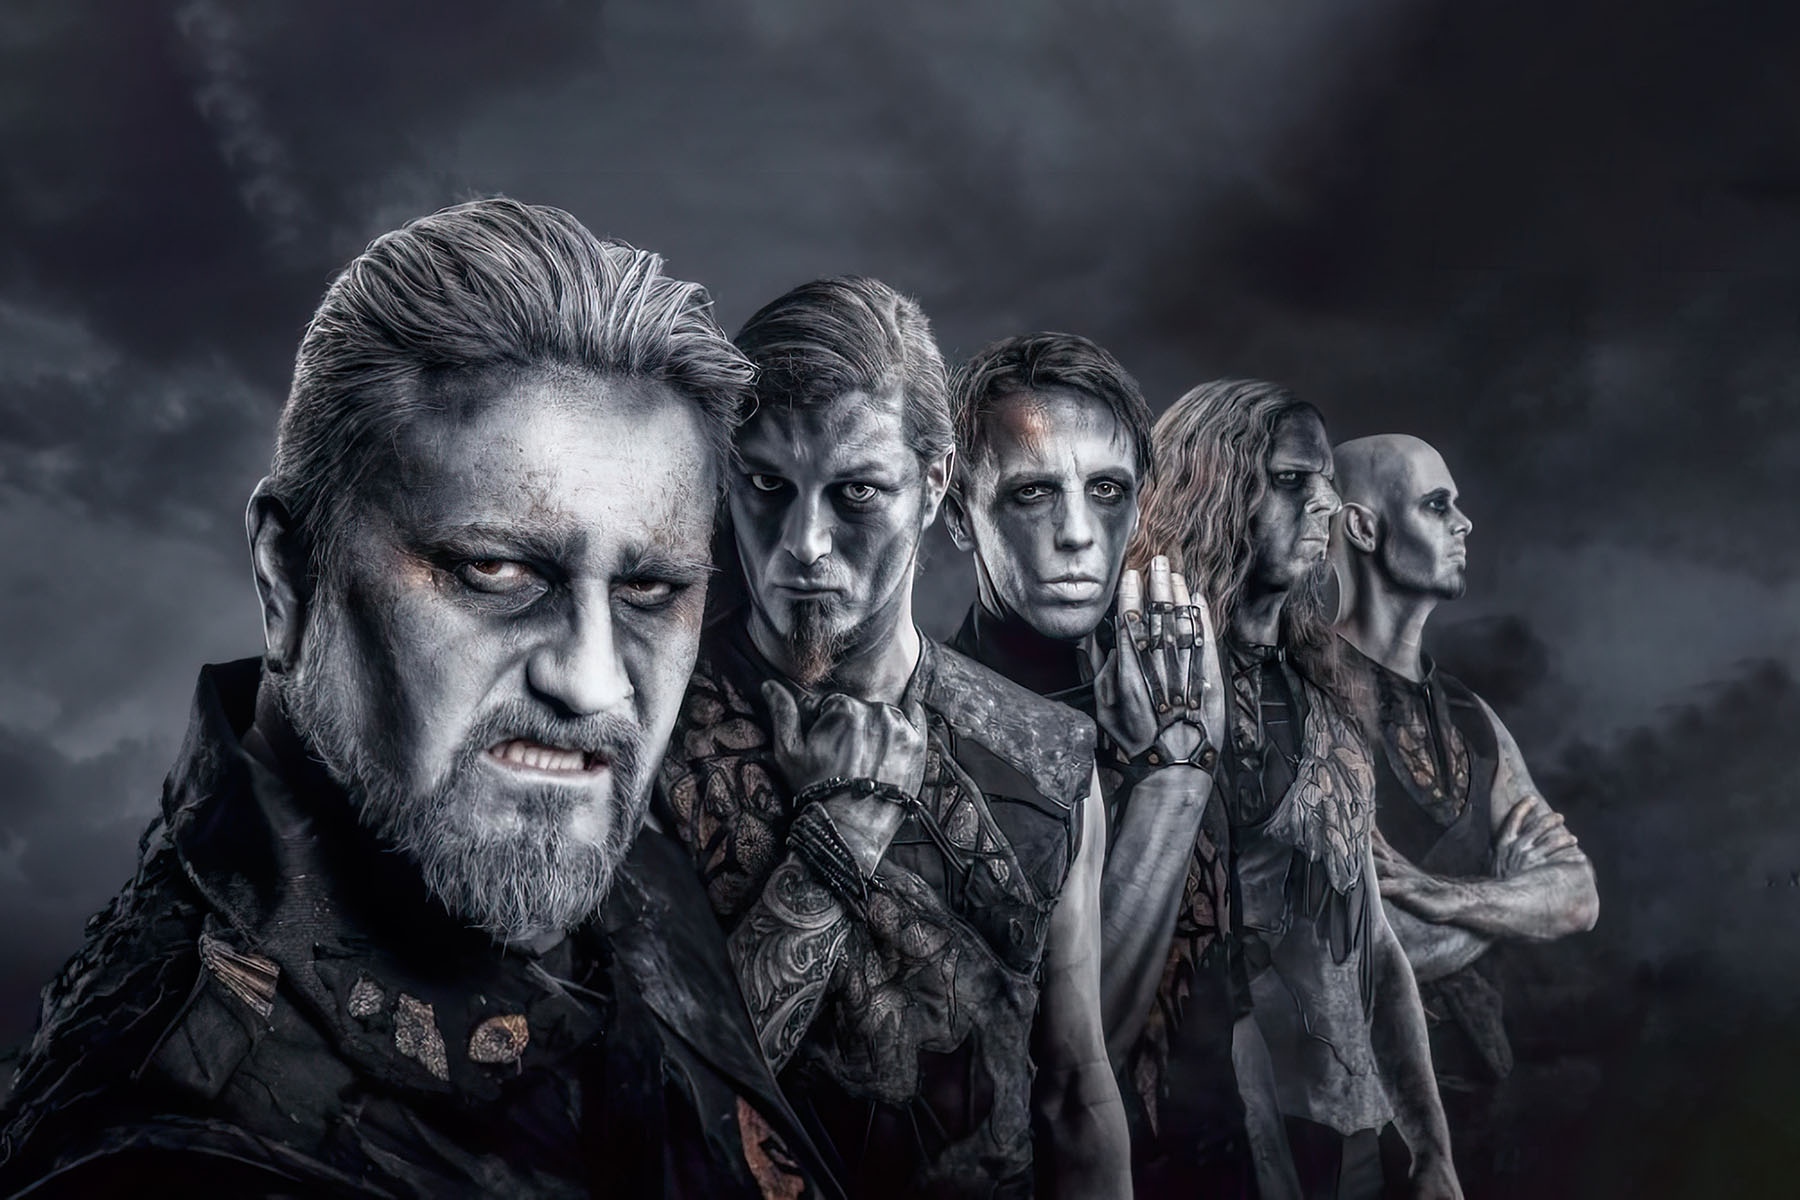 The story and meaning of the song 'Night of the Werewolves - Powerwolf 